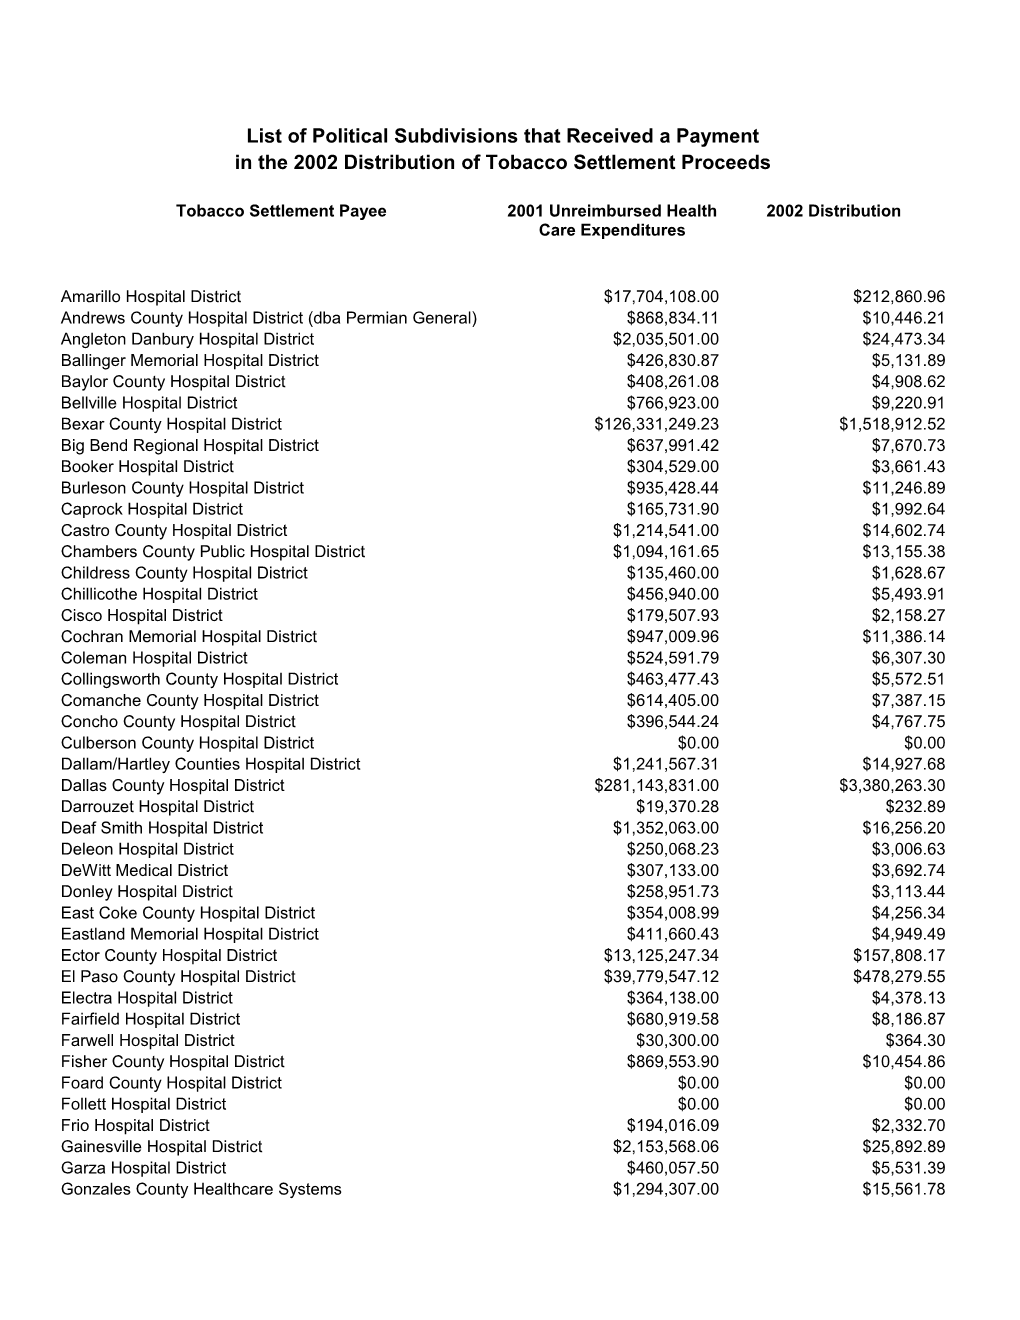 The 2002 Payment Amount for Polk County Includes a Reduction of $2,599.55 That Was Overpaid